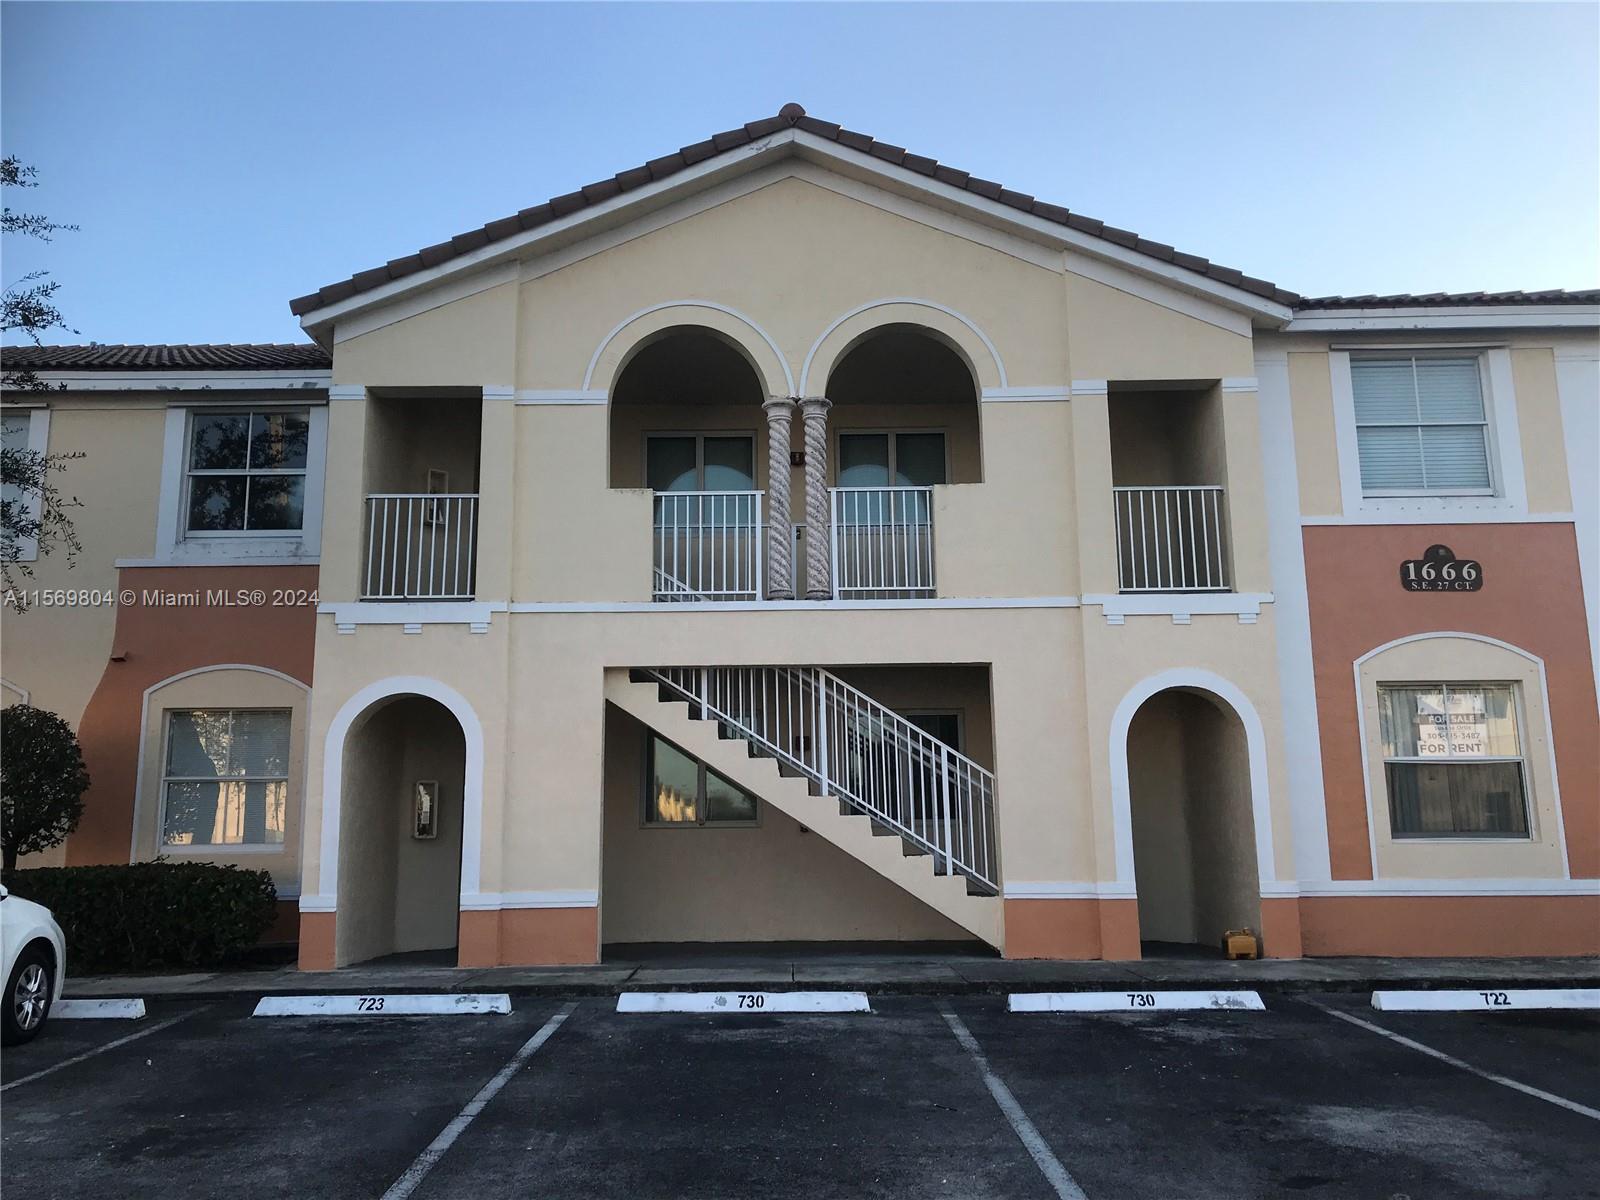 For rent 3/2 condo unit, in Keys Coves, first floor and a corner unit located in a gated and quiet community. Include inside washer, & dryer. Freshly painted, ceramic floor. Master Bedroom with walking closet and updated bathroom. Two assigned parking spaces (719),  security 24 hours, management on site; clubhouse, community pool. Excellent location close to Florida City Outlets, turnpike, the keys, malls, Baptist Hospital
 restaurants, schools, and walking distance to the park & Publix.